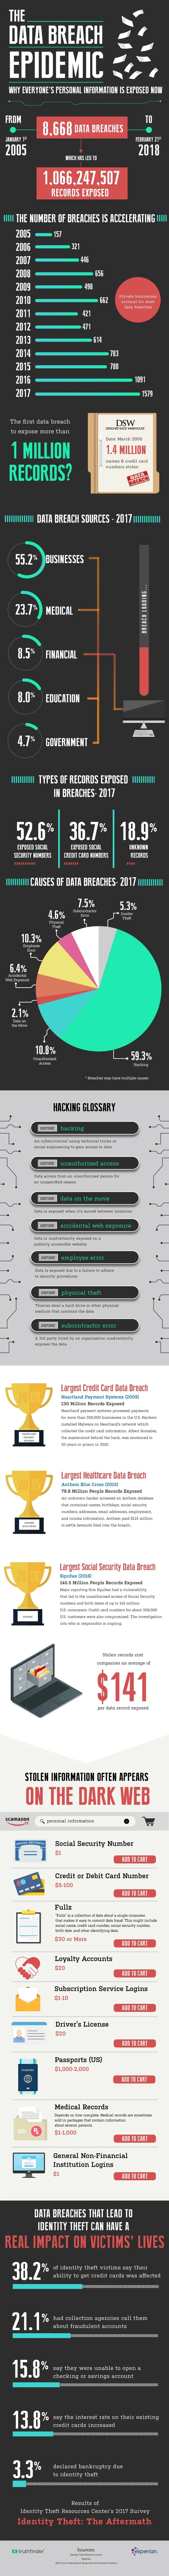 The Data Breach Epidemic: Why Everyone's Personal Information Is Exposed Now - #infographic